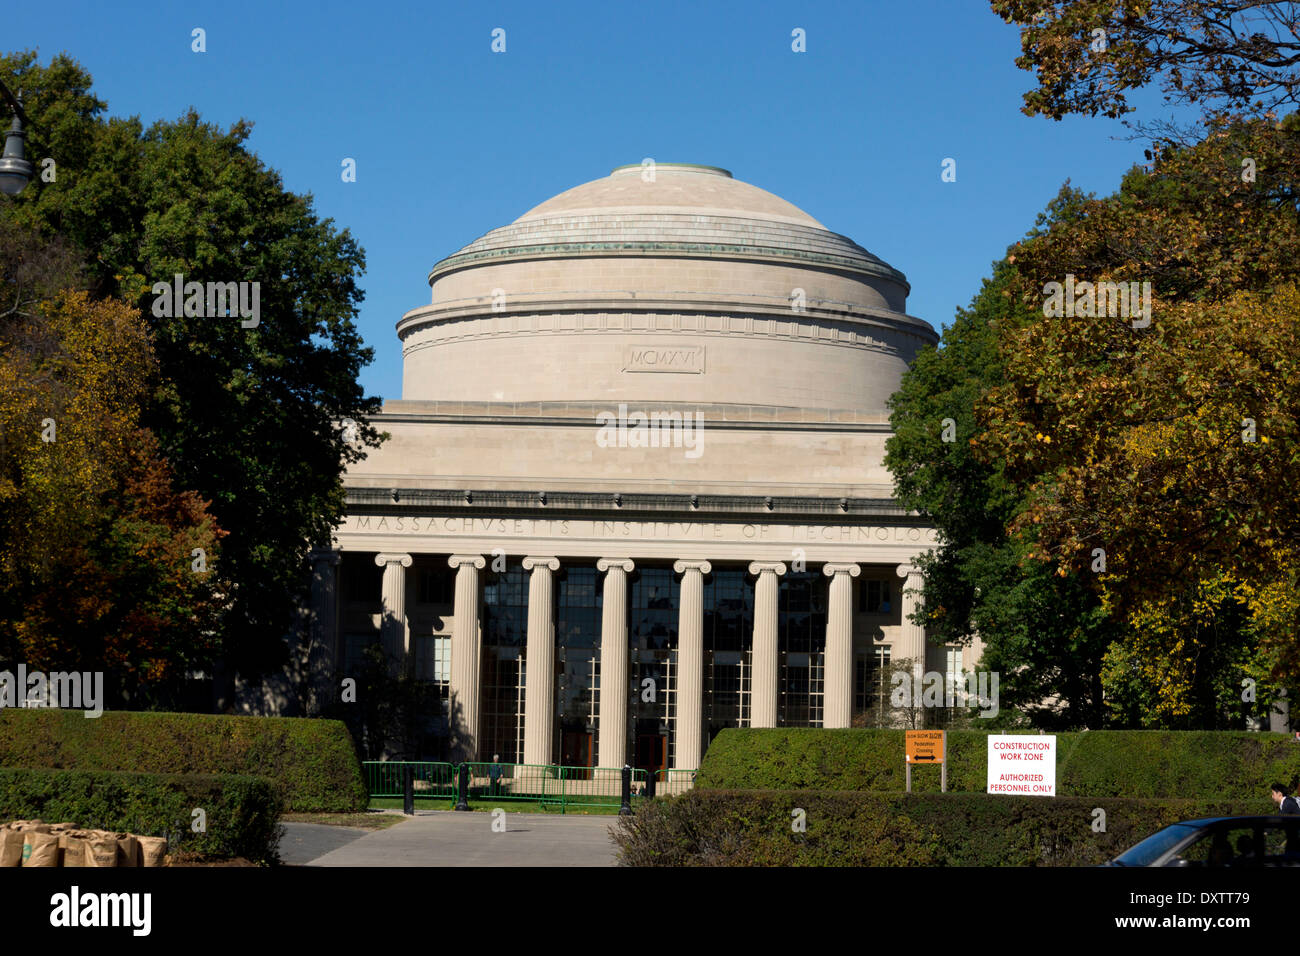 The Hack Gallery, a building belonging to the Massachusetts Institute of Technology (MIT) in Boston, Massachusetts, USA Stock Photo